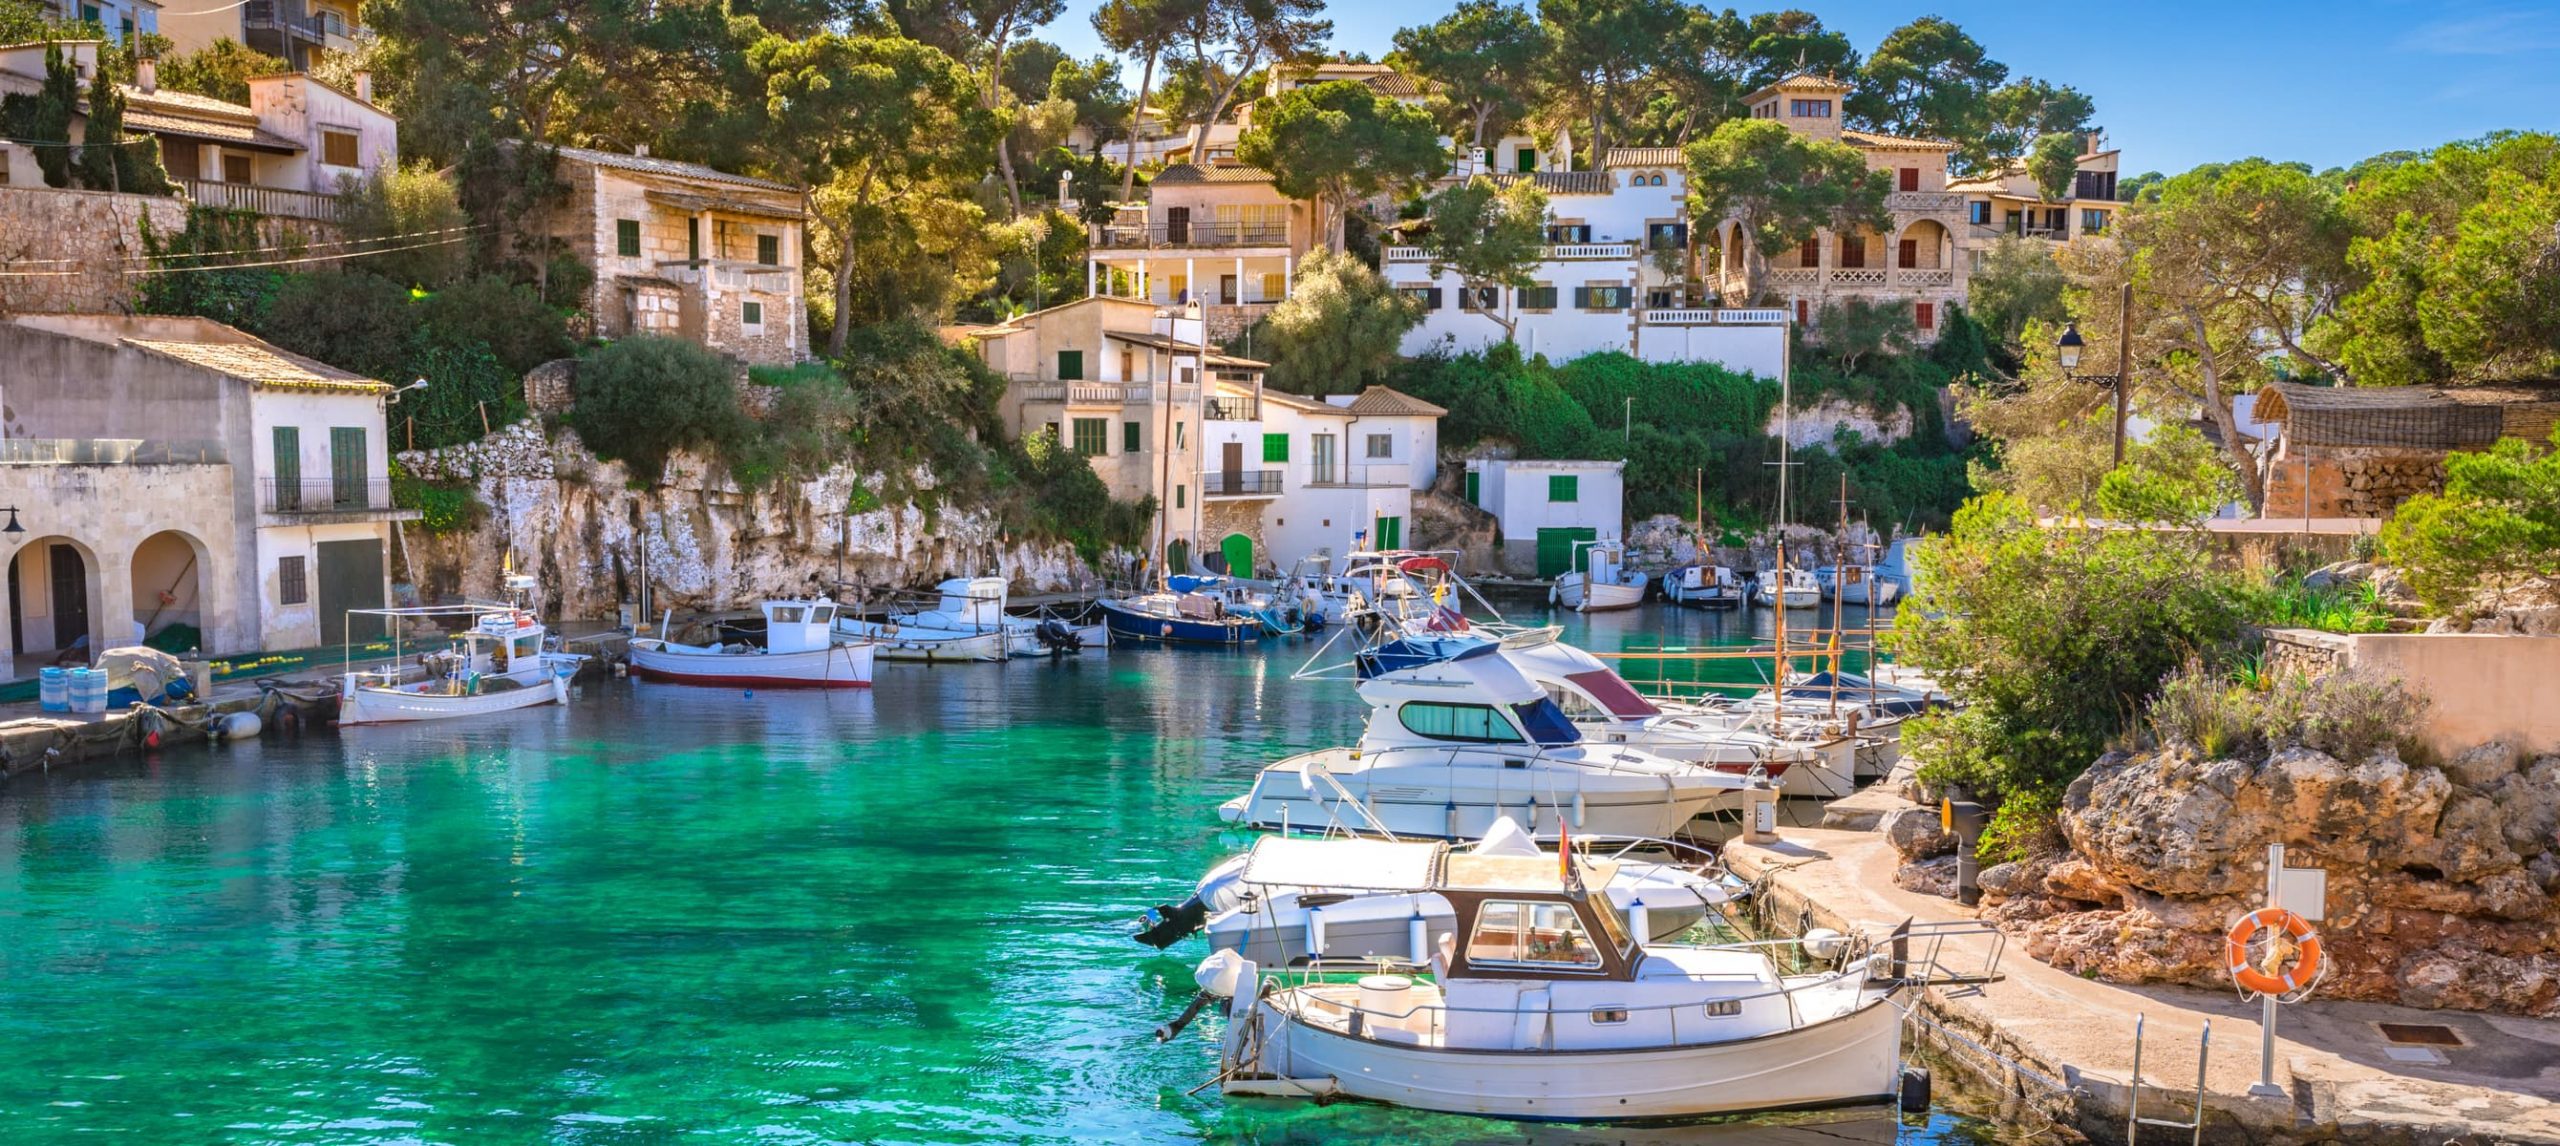 The 9 Best Places To Visit In Mallorca, Spain